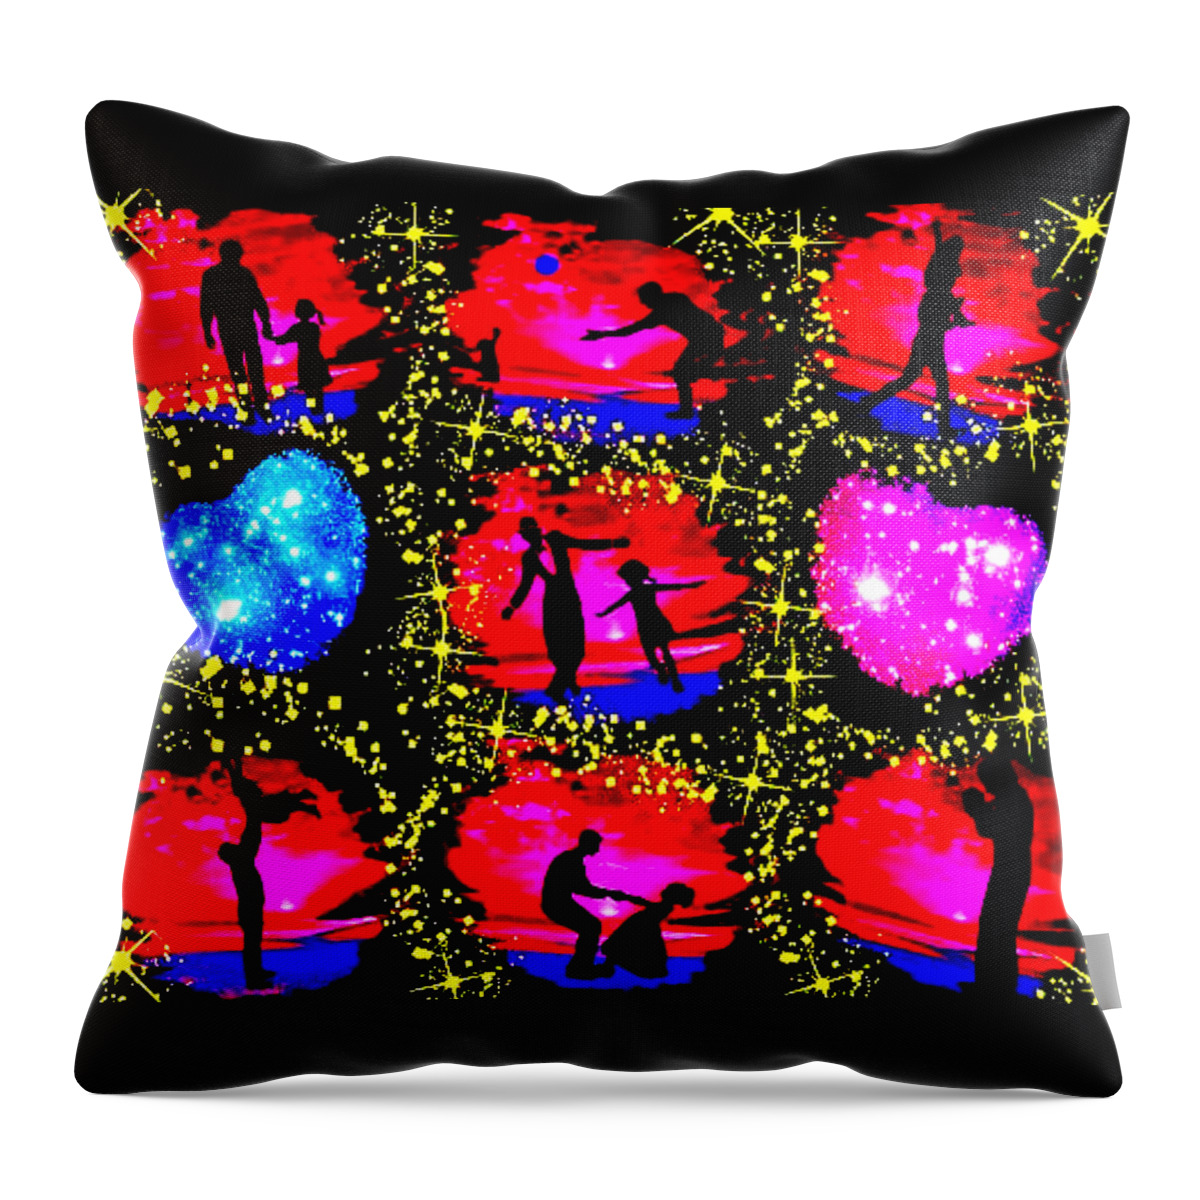 A Fathers Love Poem Throw Pillow featuring the digital art A Fathers Love As Seen On TV Collage by Stephen Battel